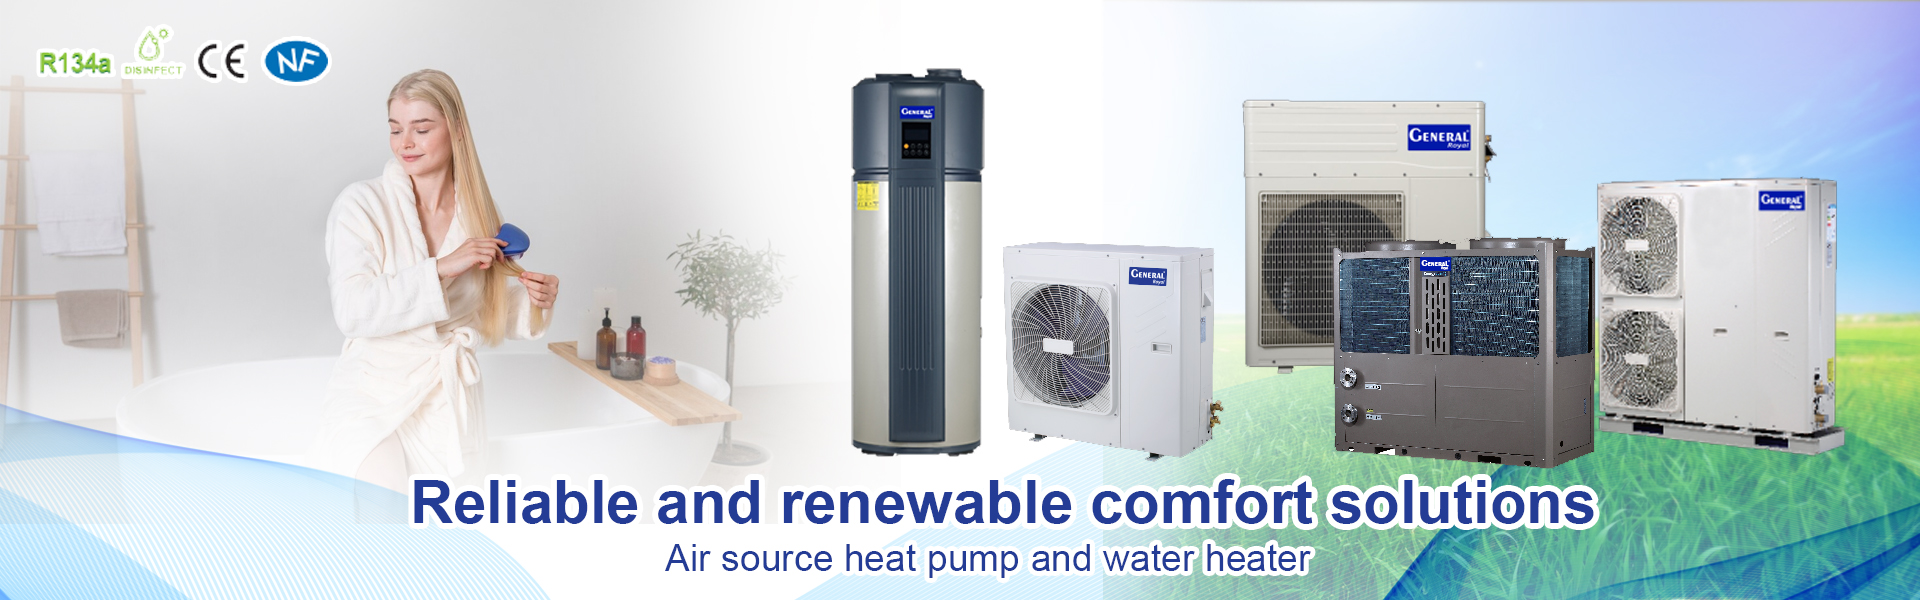 Reliable and renewable comfort solutions